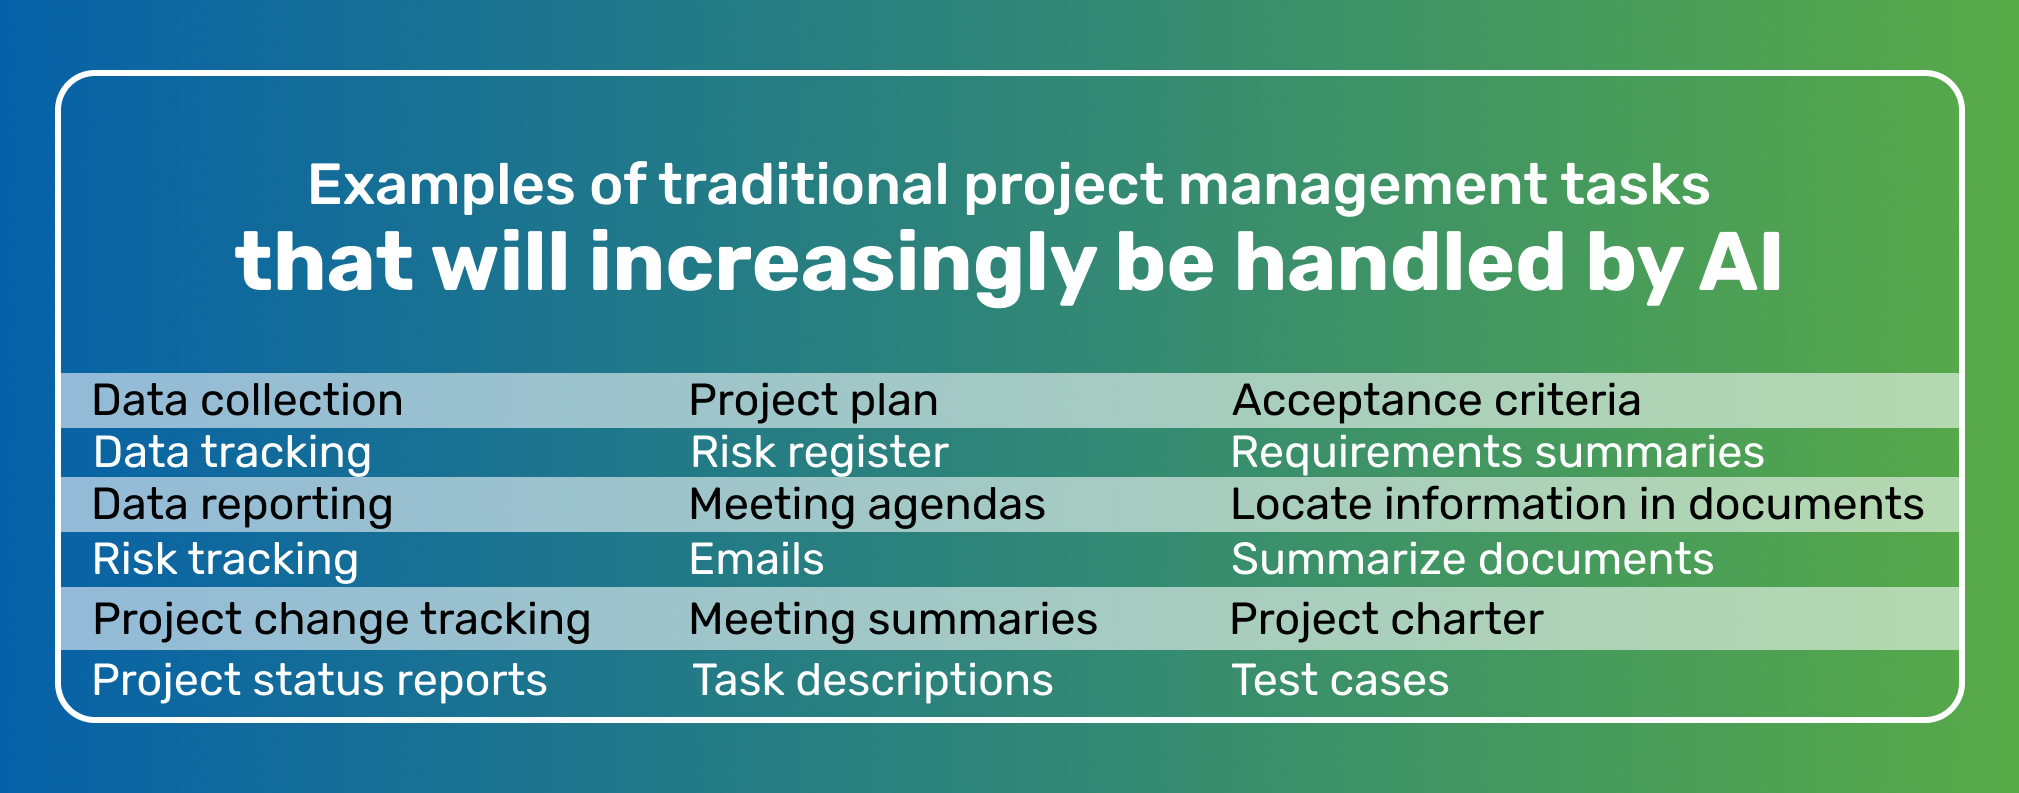 list of project management tasks to be handled by AI - iTalent Digital blog